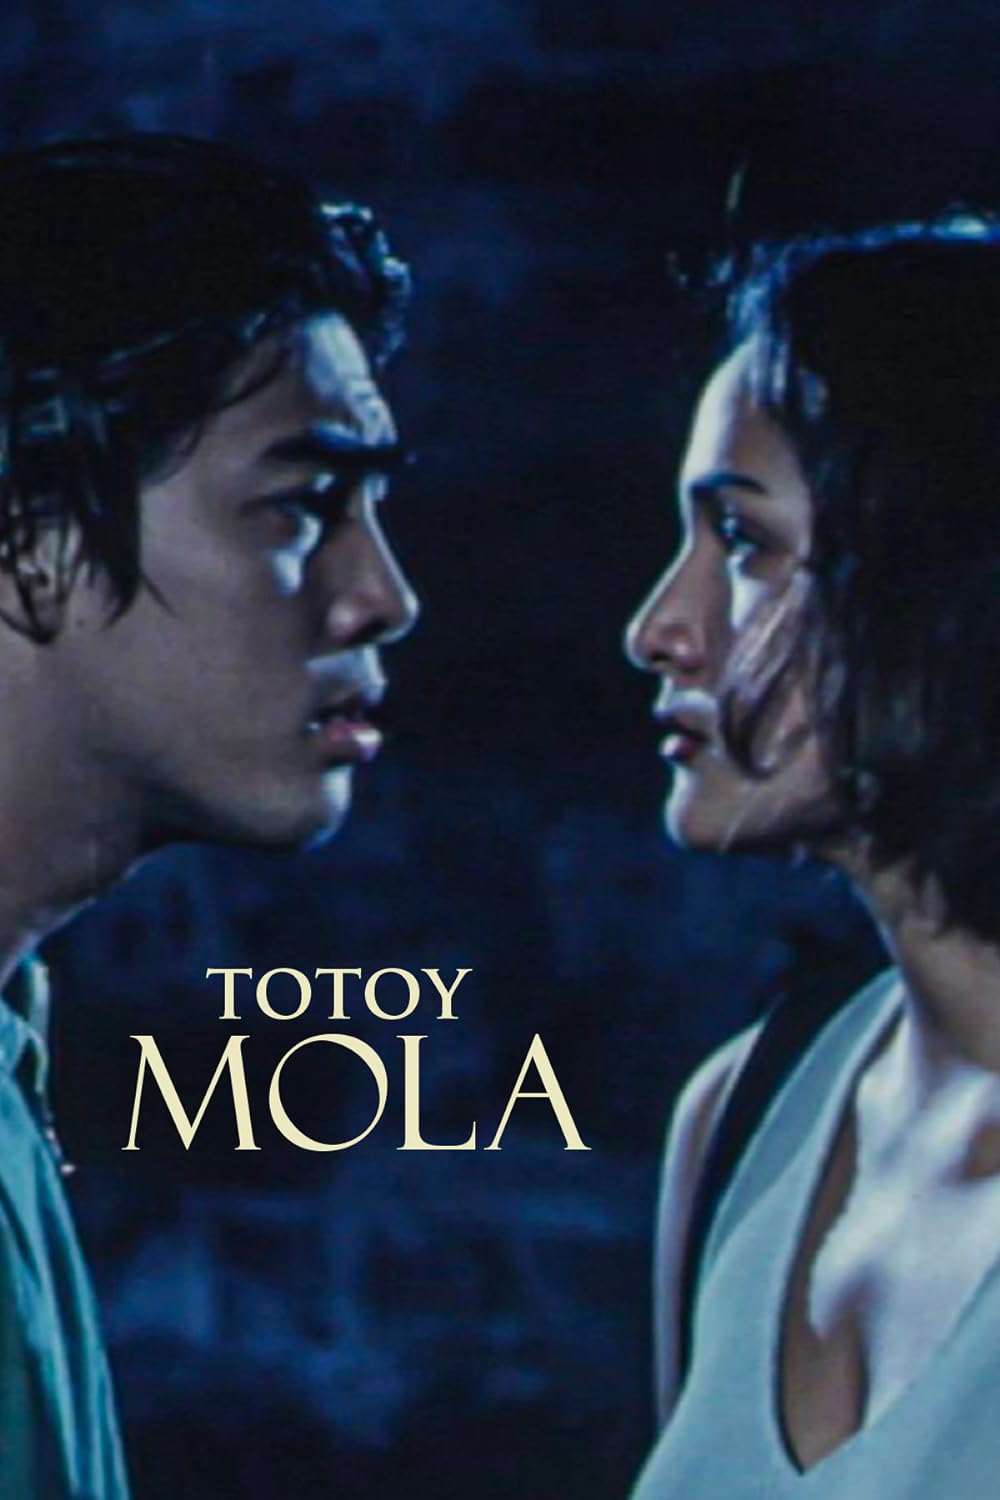 Totoy Mola 1997 movie poster 1